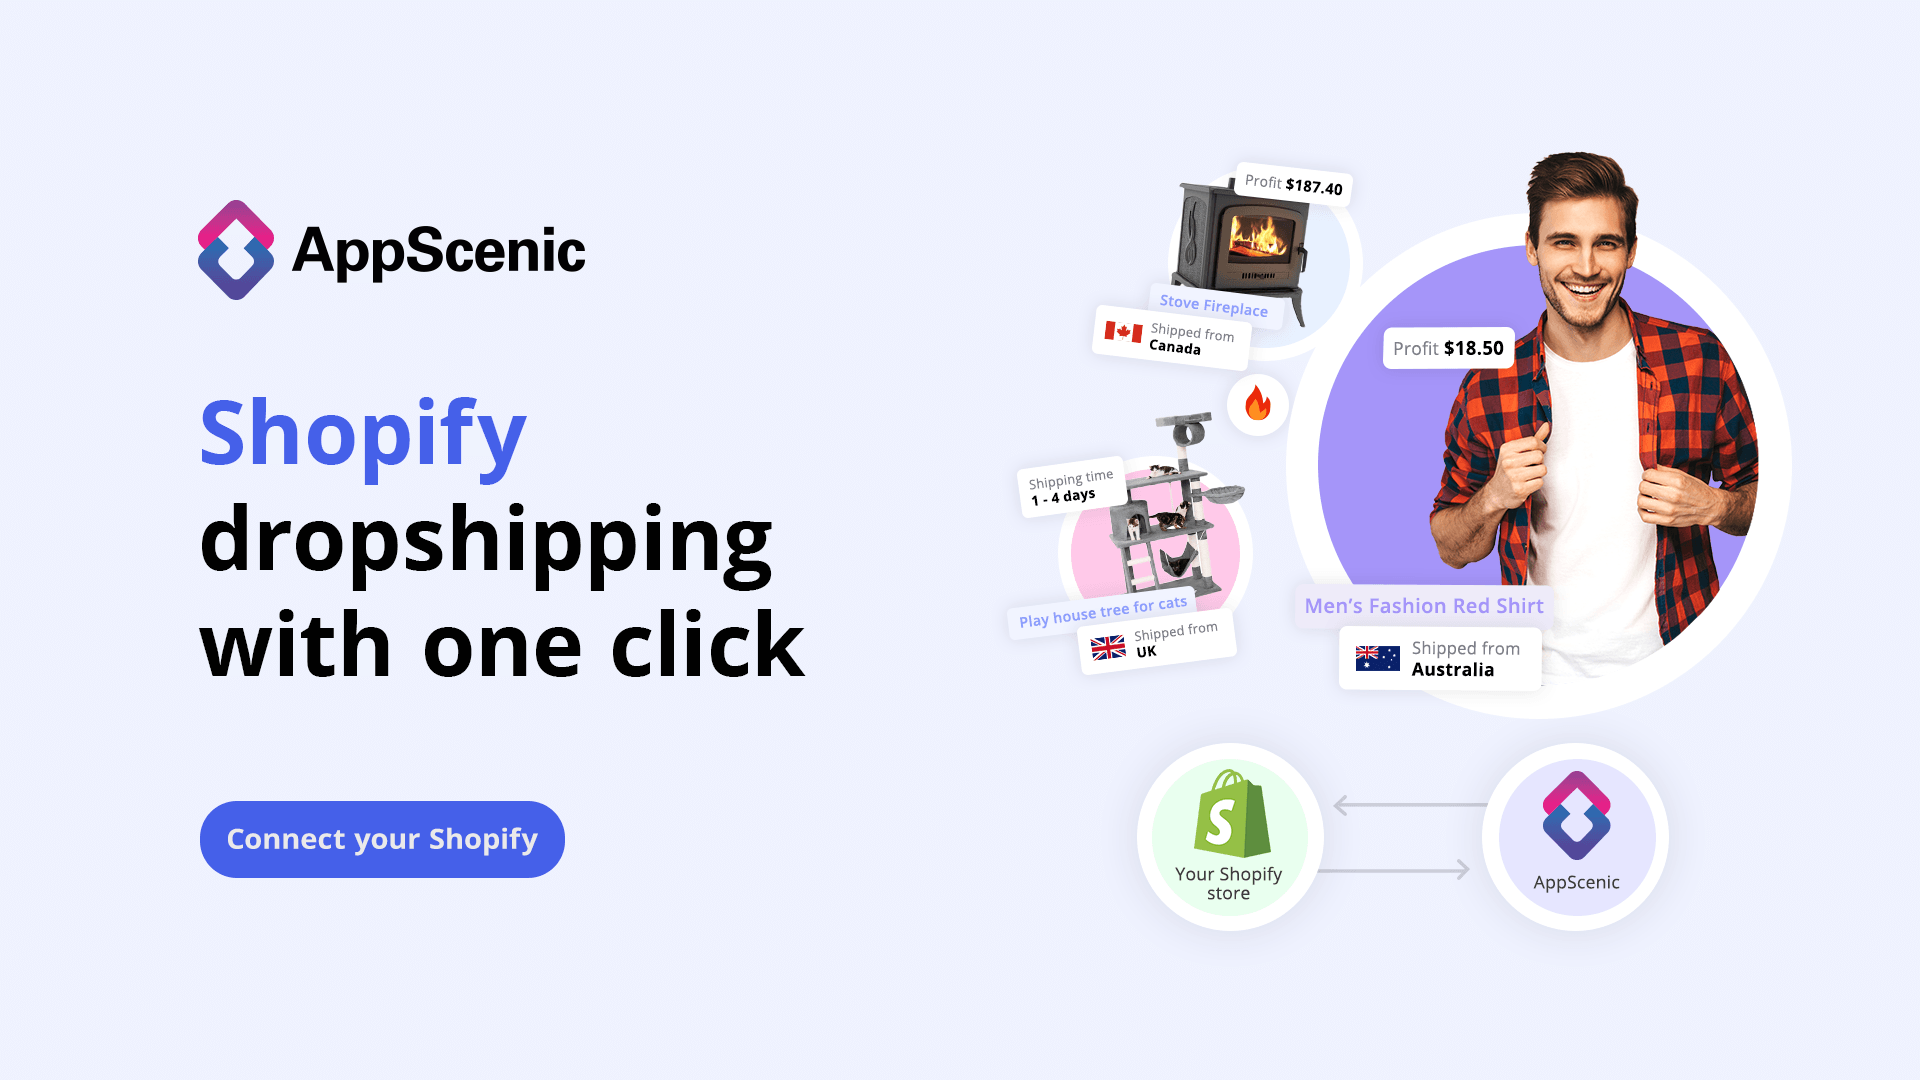 The best Shopify Dropshipping platform. Fast suppliers. Top products. Fully  automated & 24/7 sync – AppScenic - Dropshipping & Wholesale Platform - Verified  Suppliers USA/UK/EU